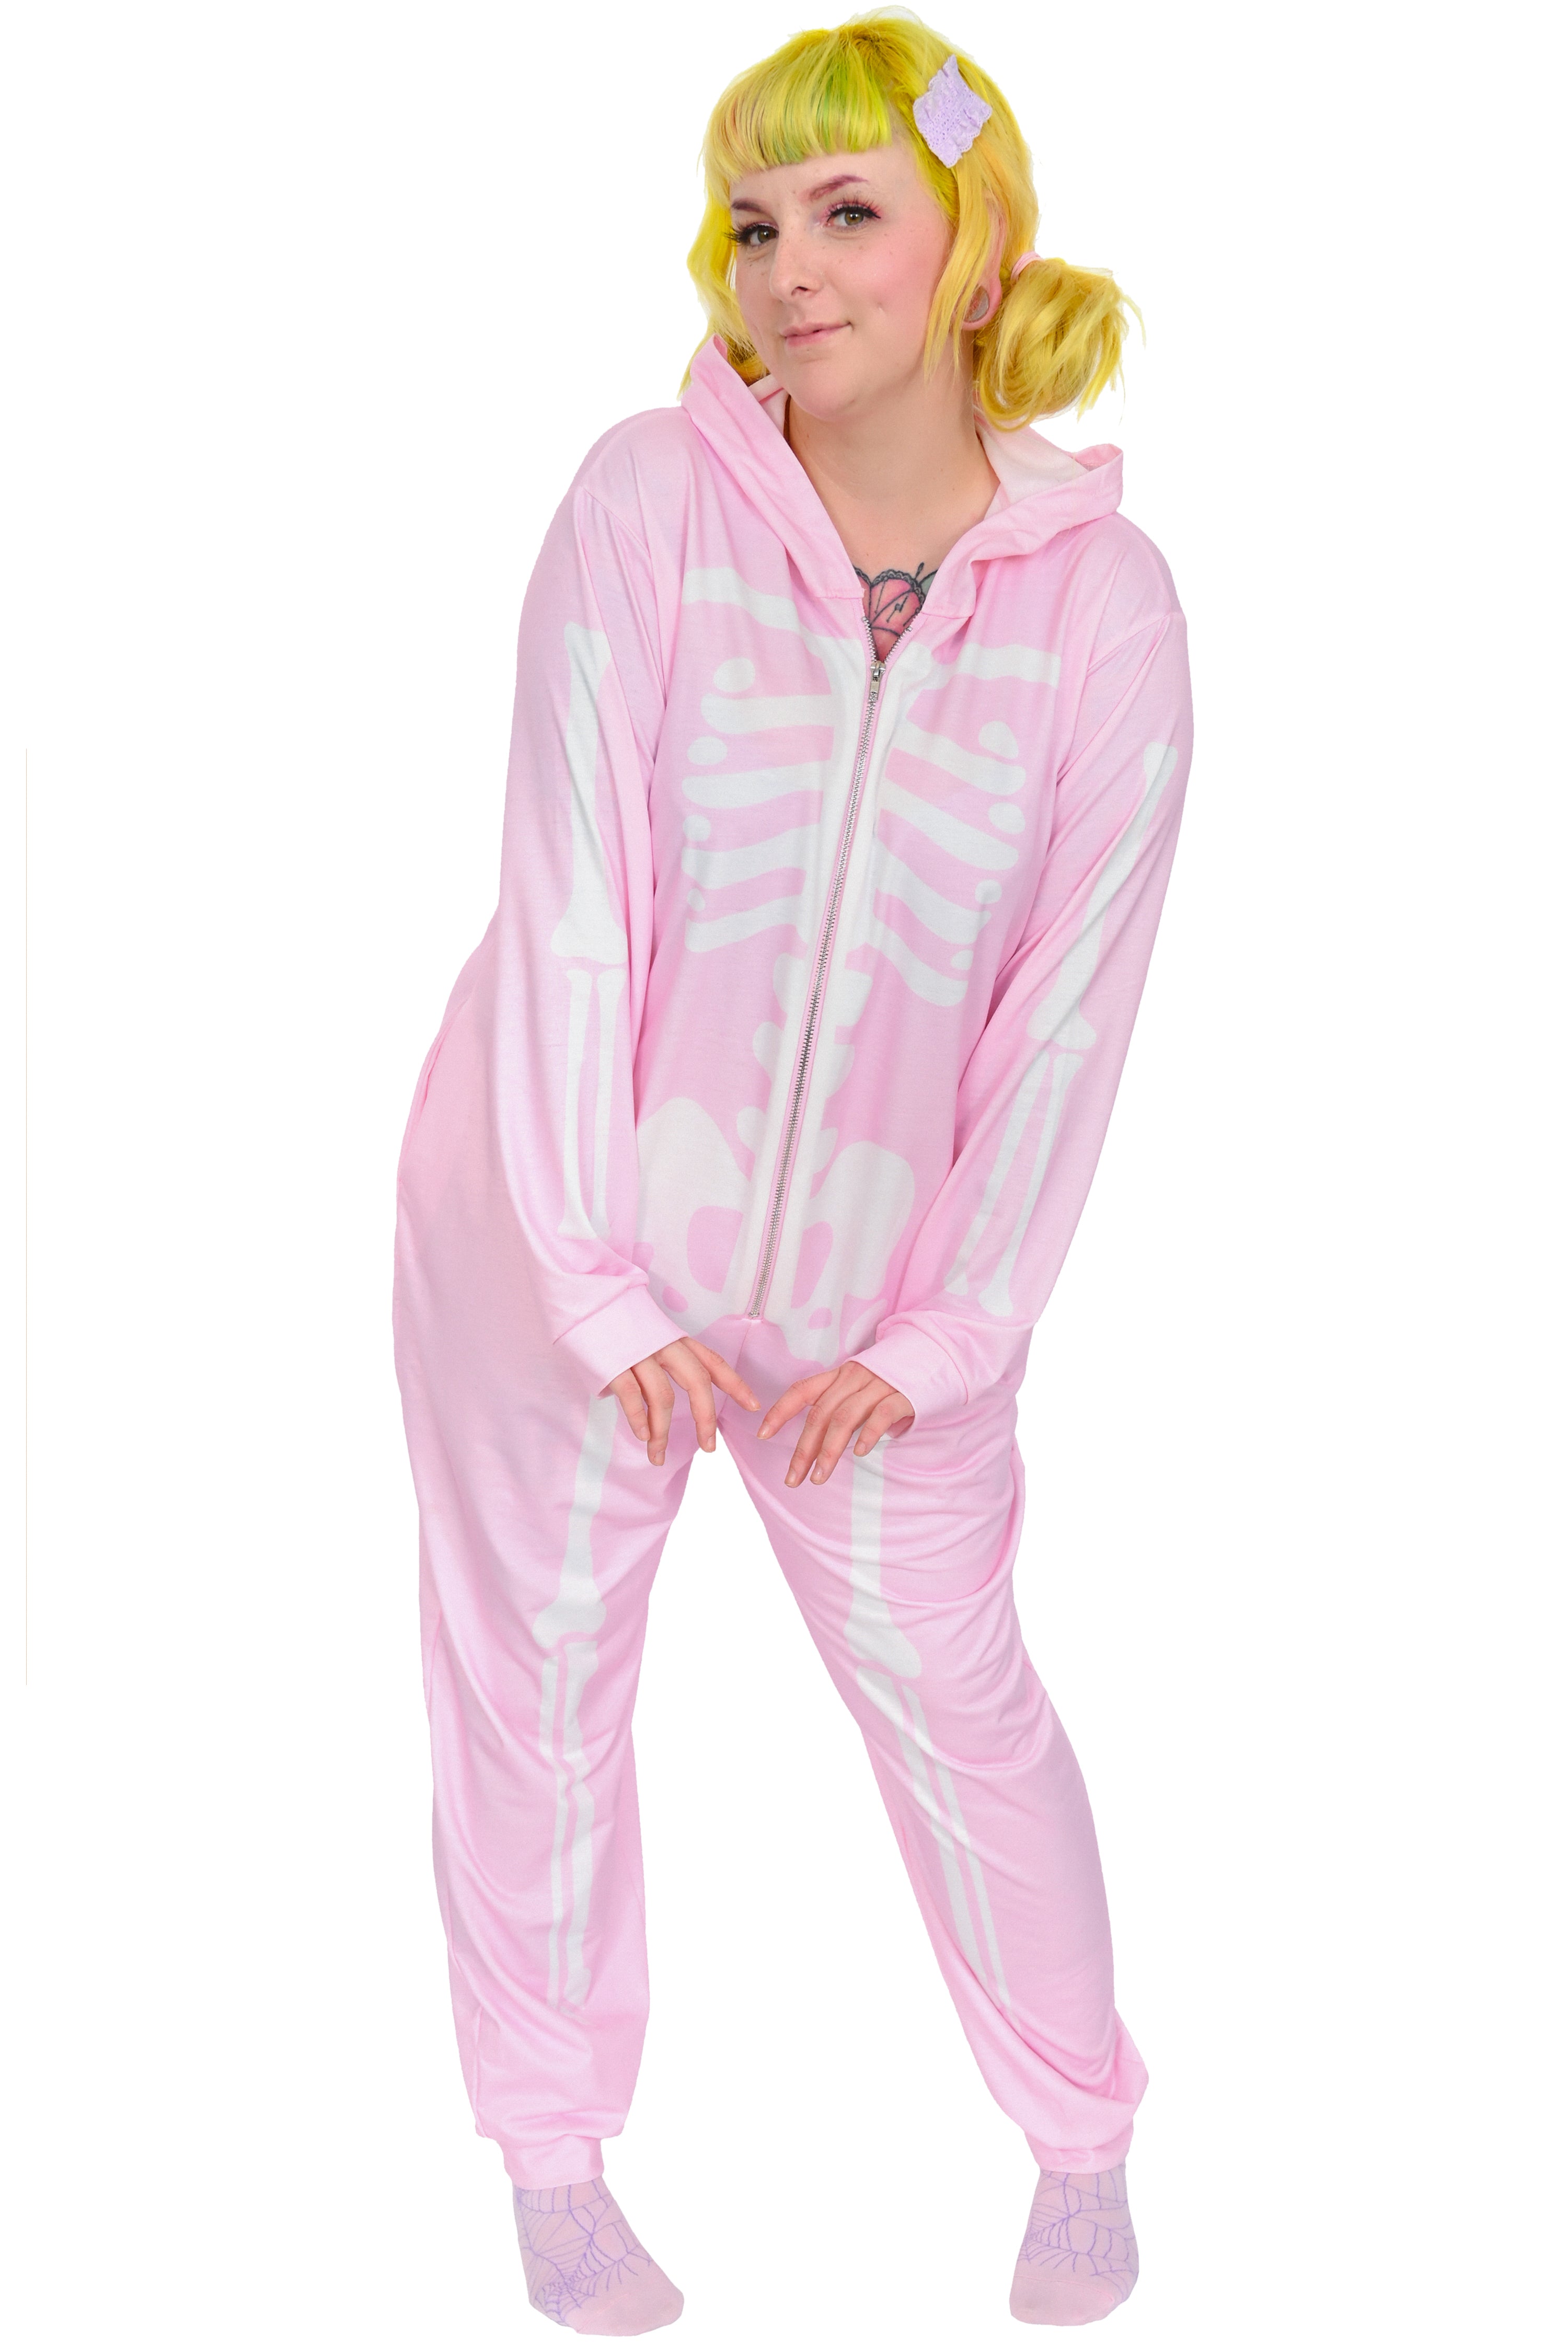 Pastel pink oversized onesie with full front and back white skeleton print.